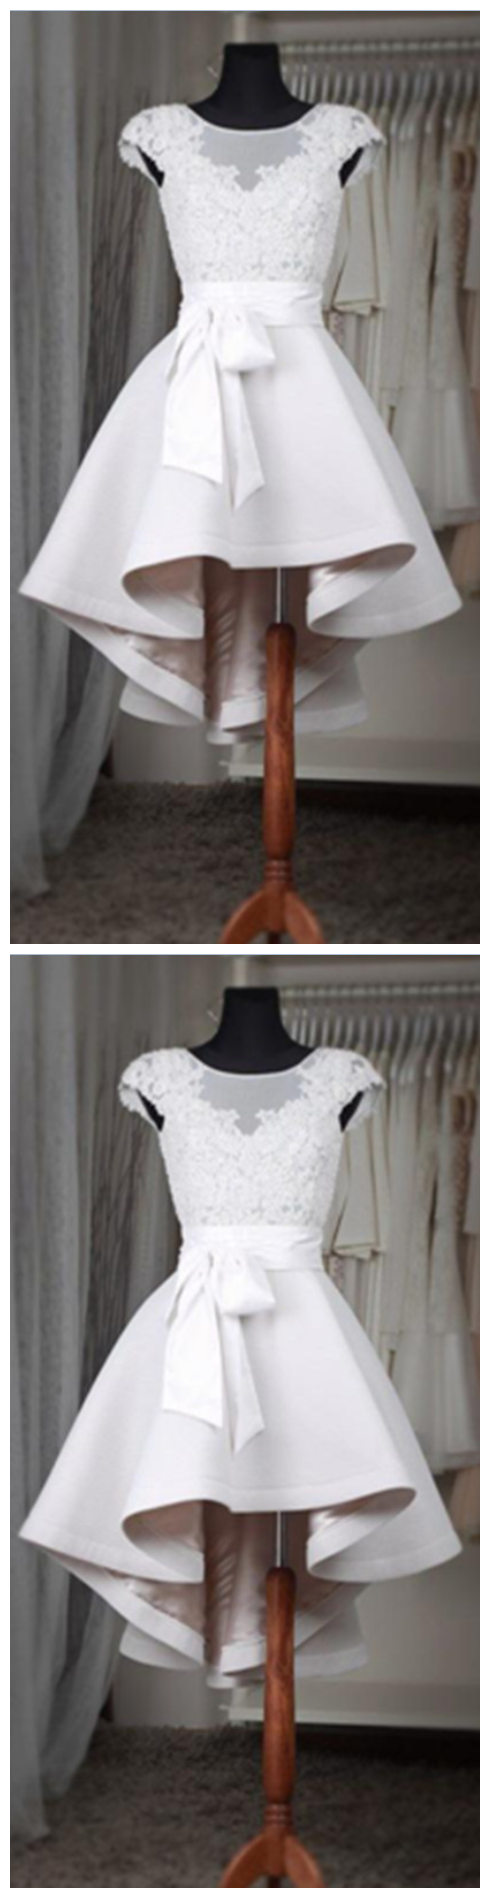 White Lace Short Homecoming Dress For Teens,classy Short Sleeves Homecoming Dresses White Belt